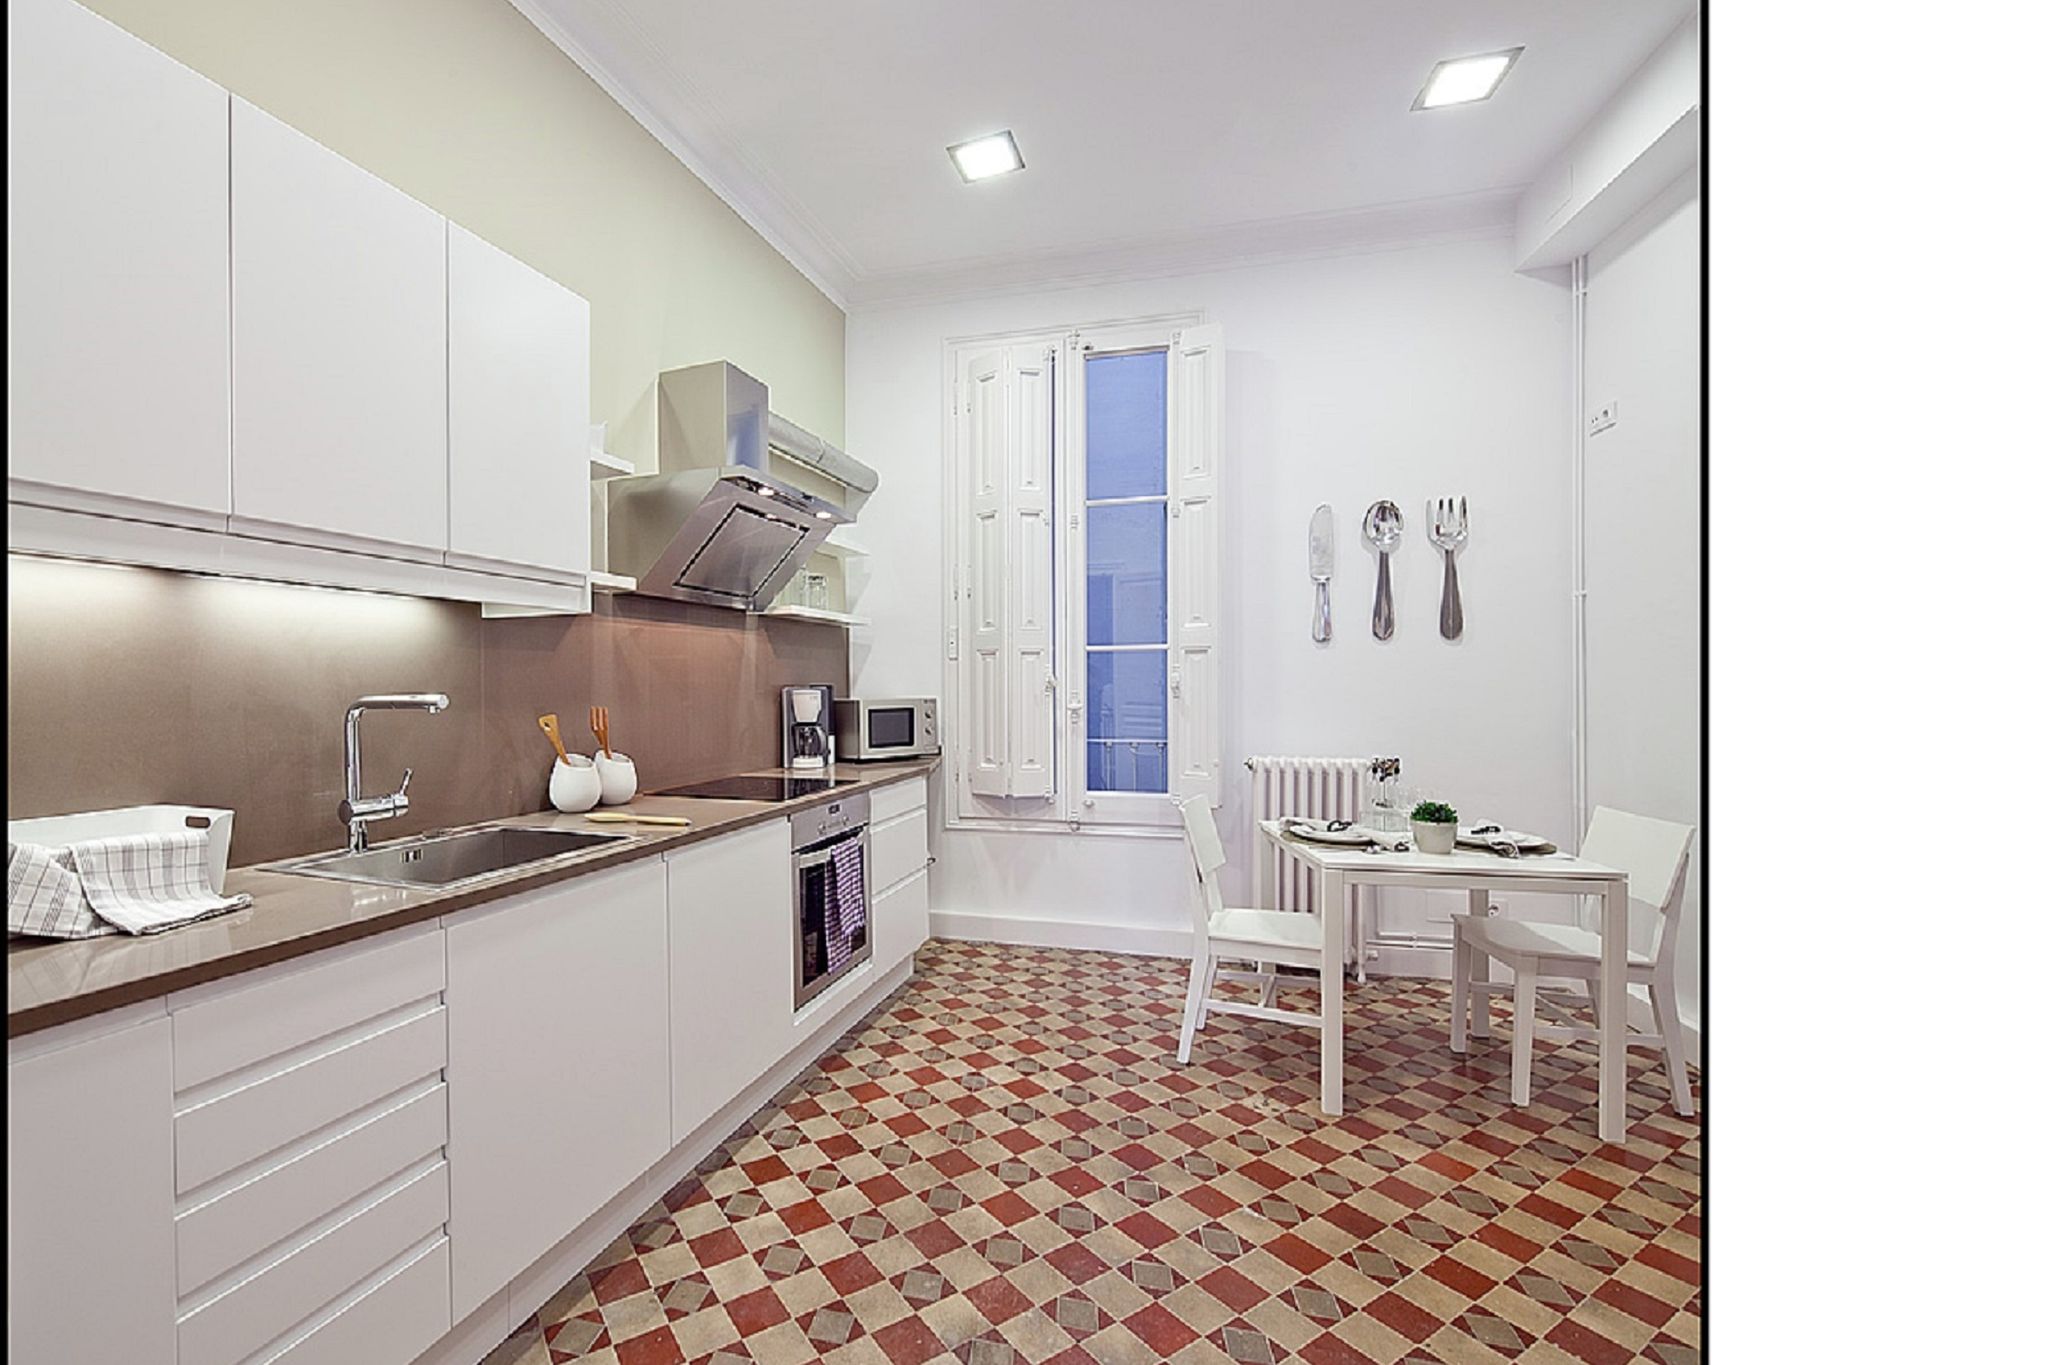 Luxurious apartment for 5 people recently renovated in the center of Barcelona